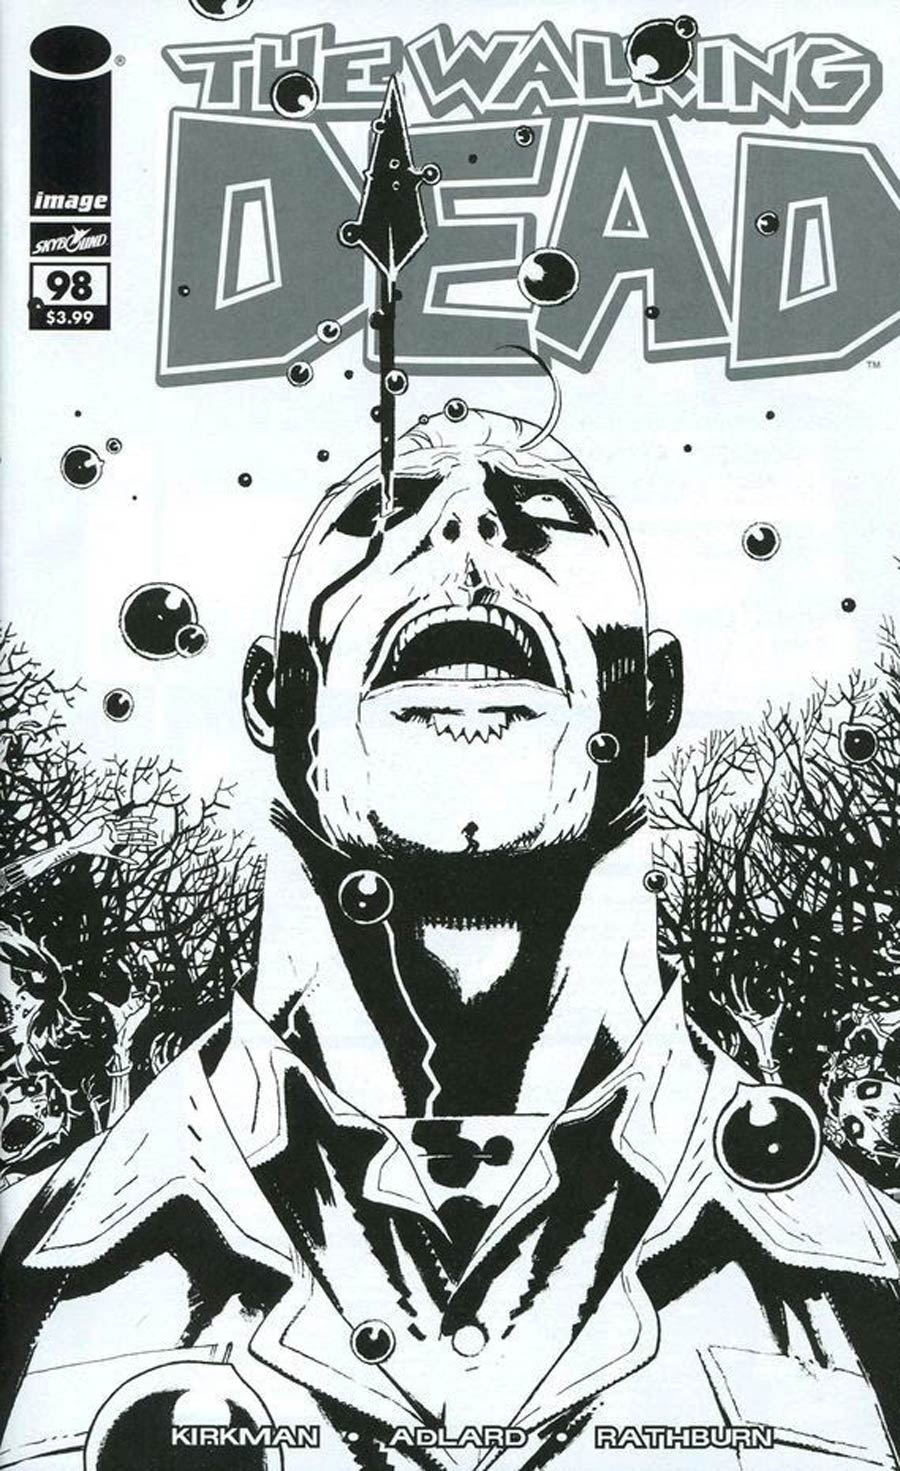 Walking Dead 15th Anniversary Blind Bag Edition #98 Cover D Wes Craig Black & White Cover Without Polybag